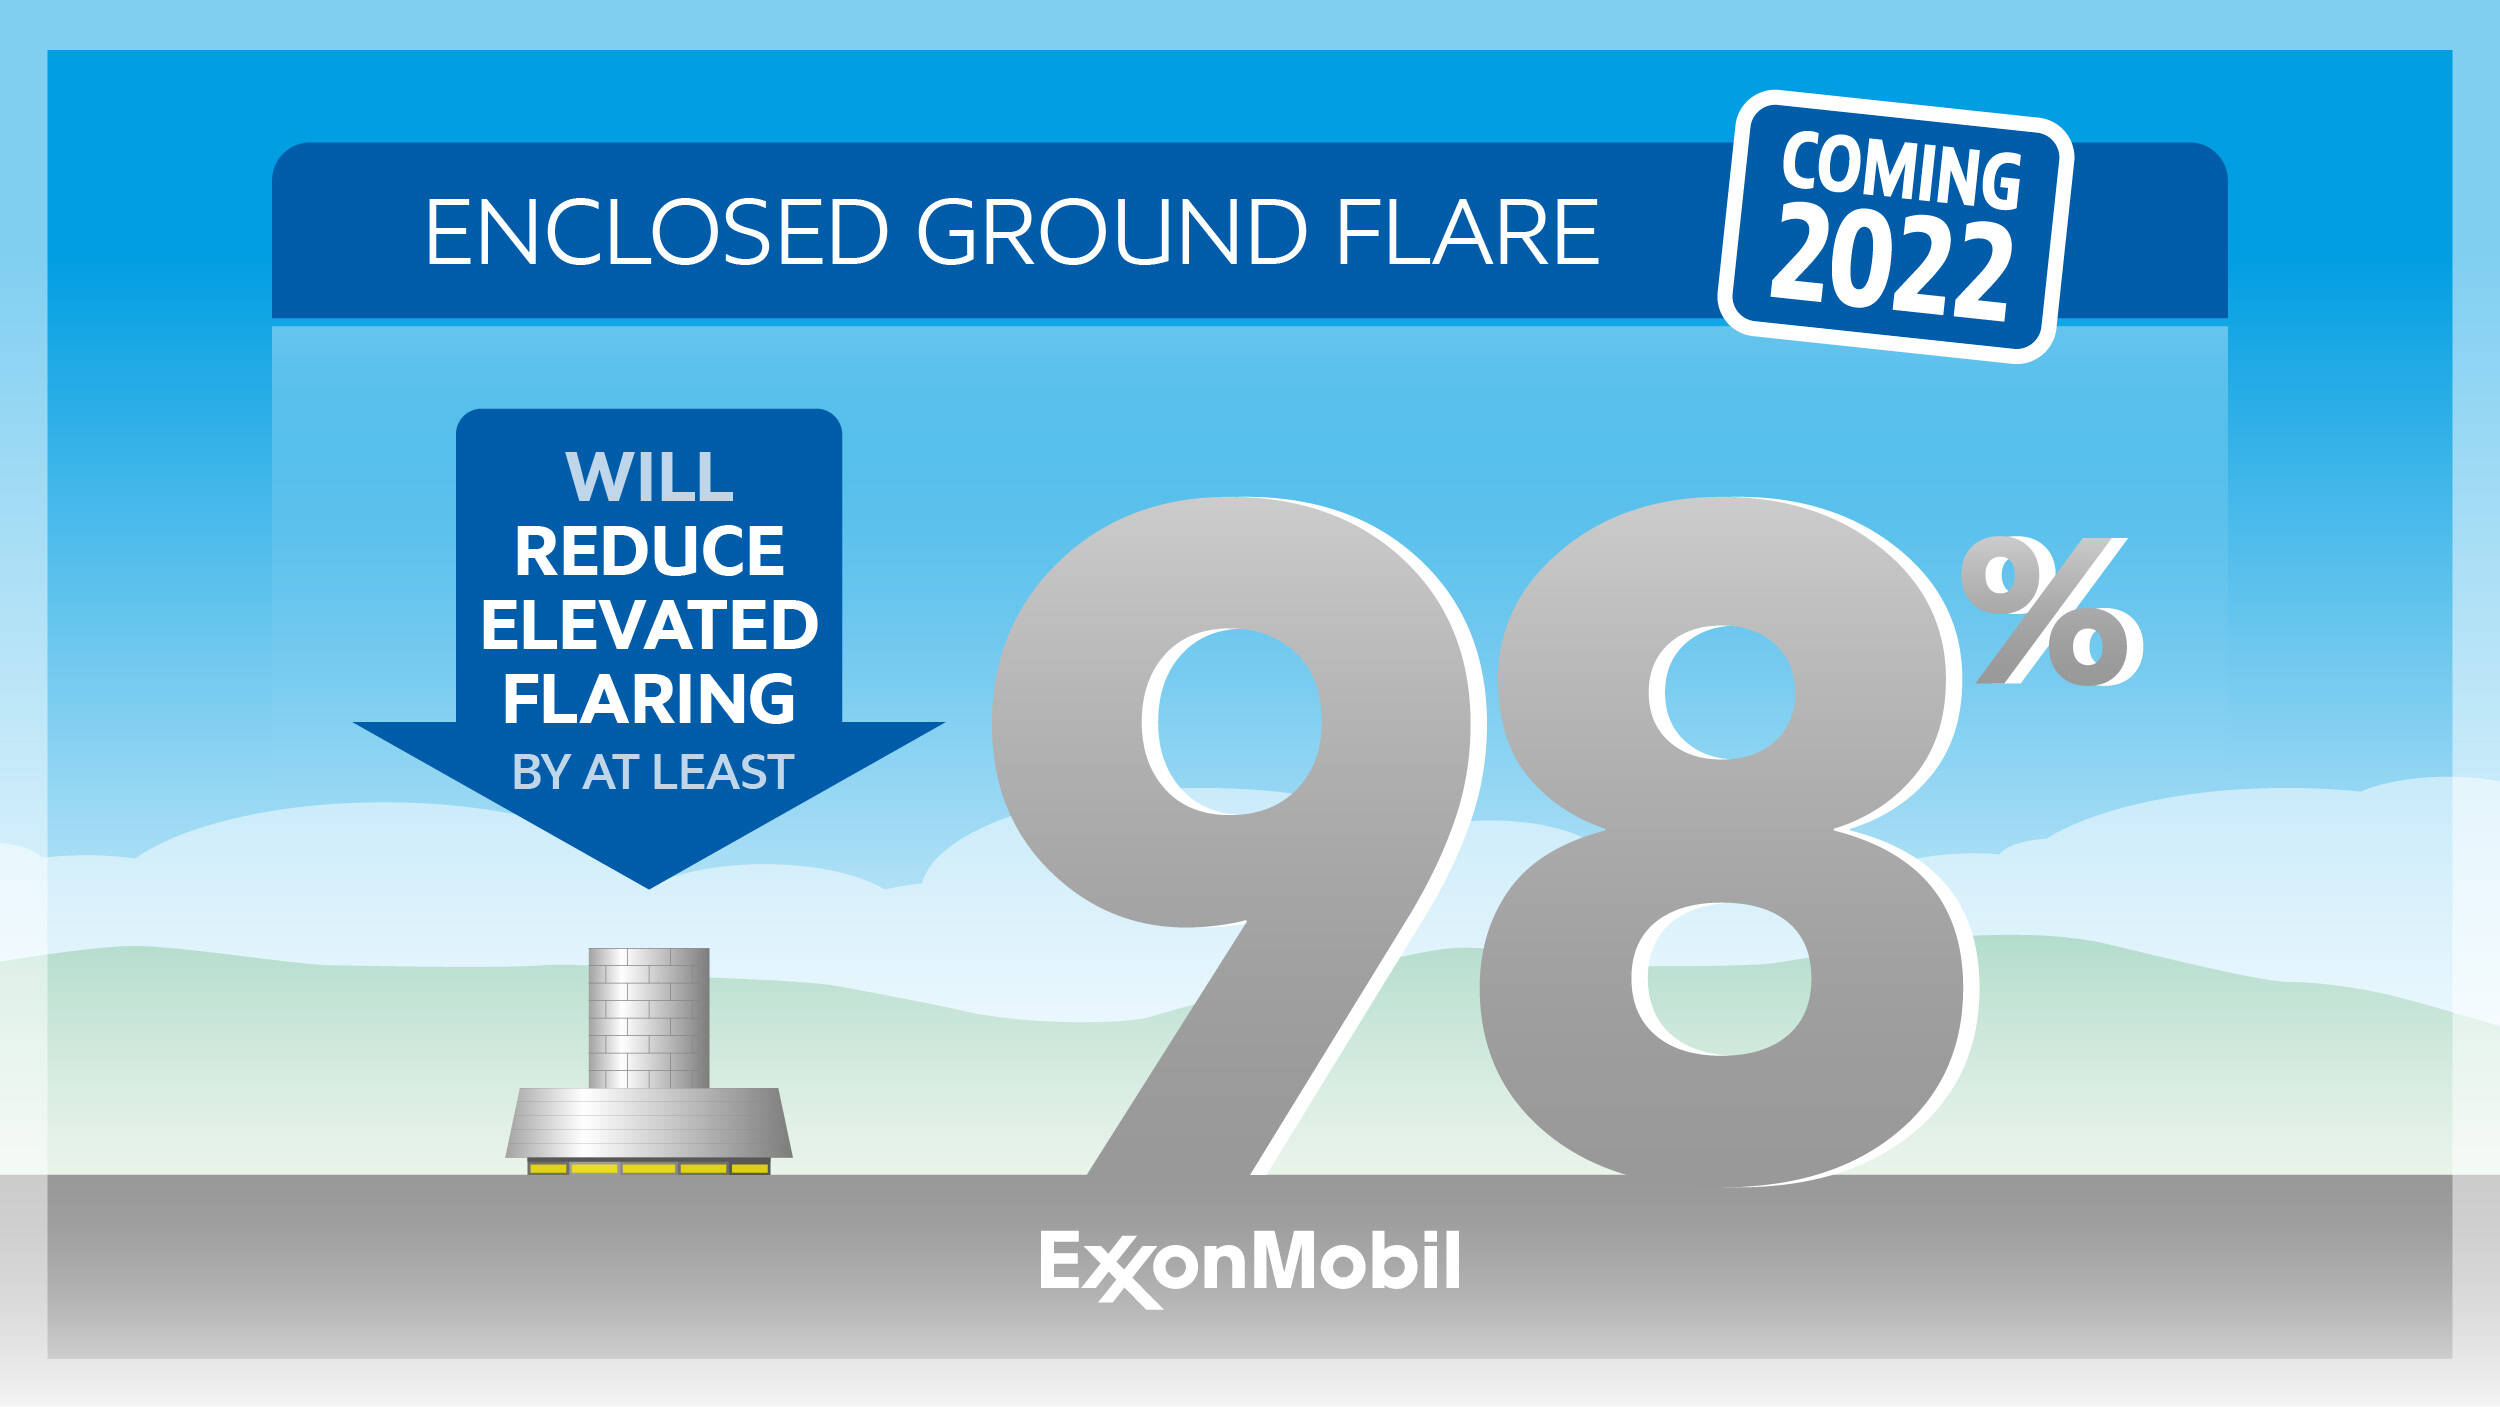 We are installing an Enclosed Ground Flare designed to reduce the use of our elevated flare by at least 98%.